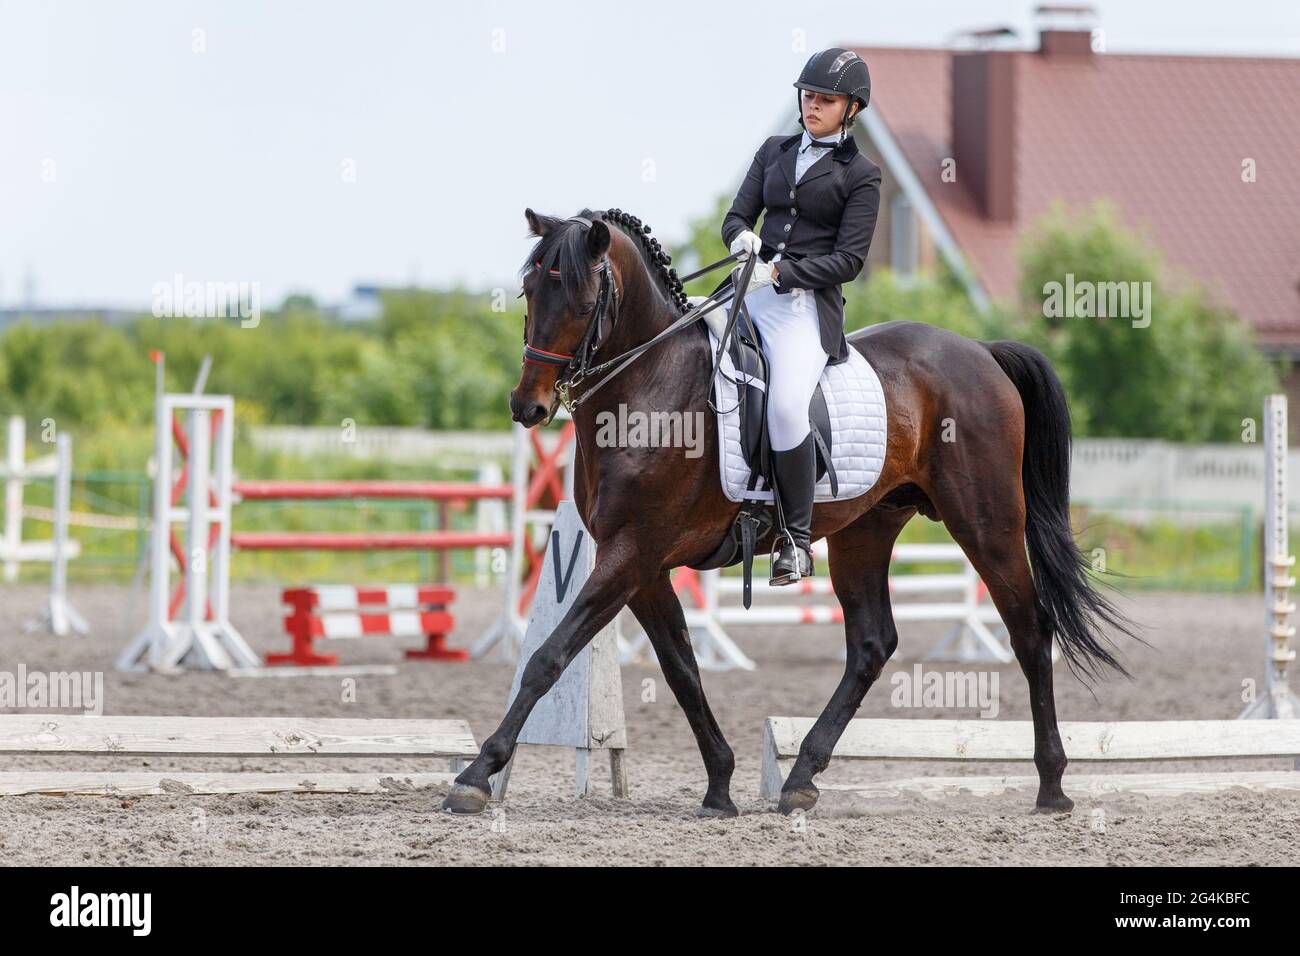 Young sportswoman riding horse on dressage test Stock Photo